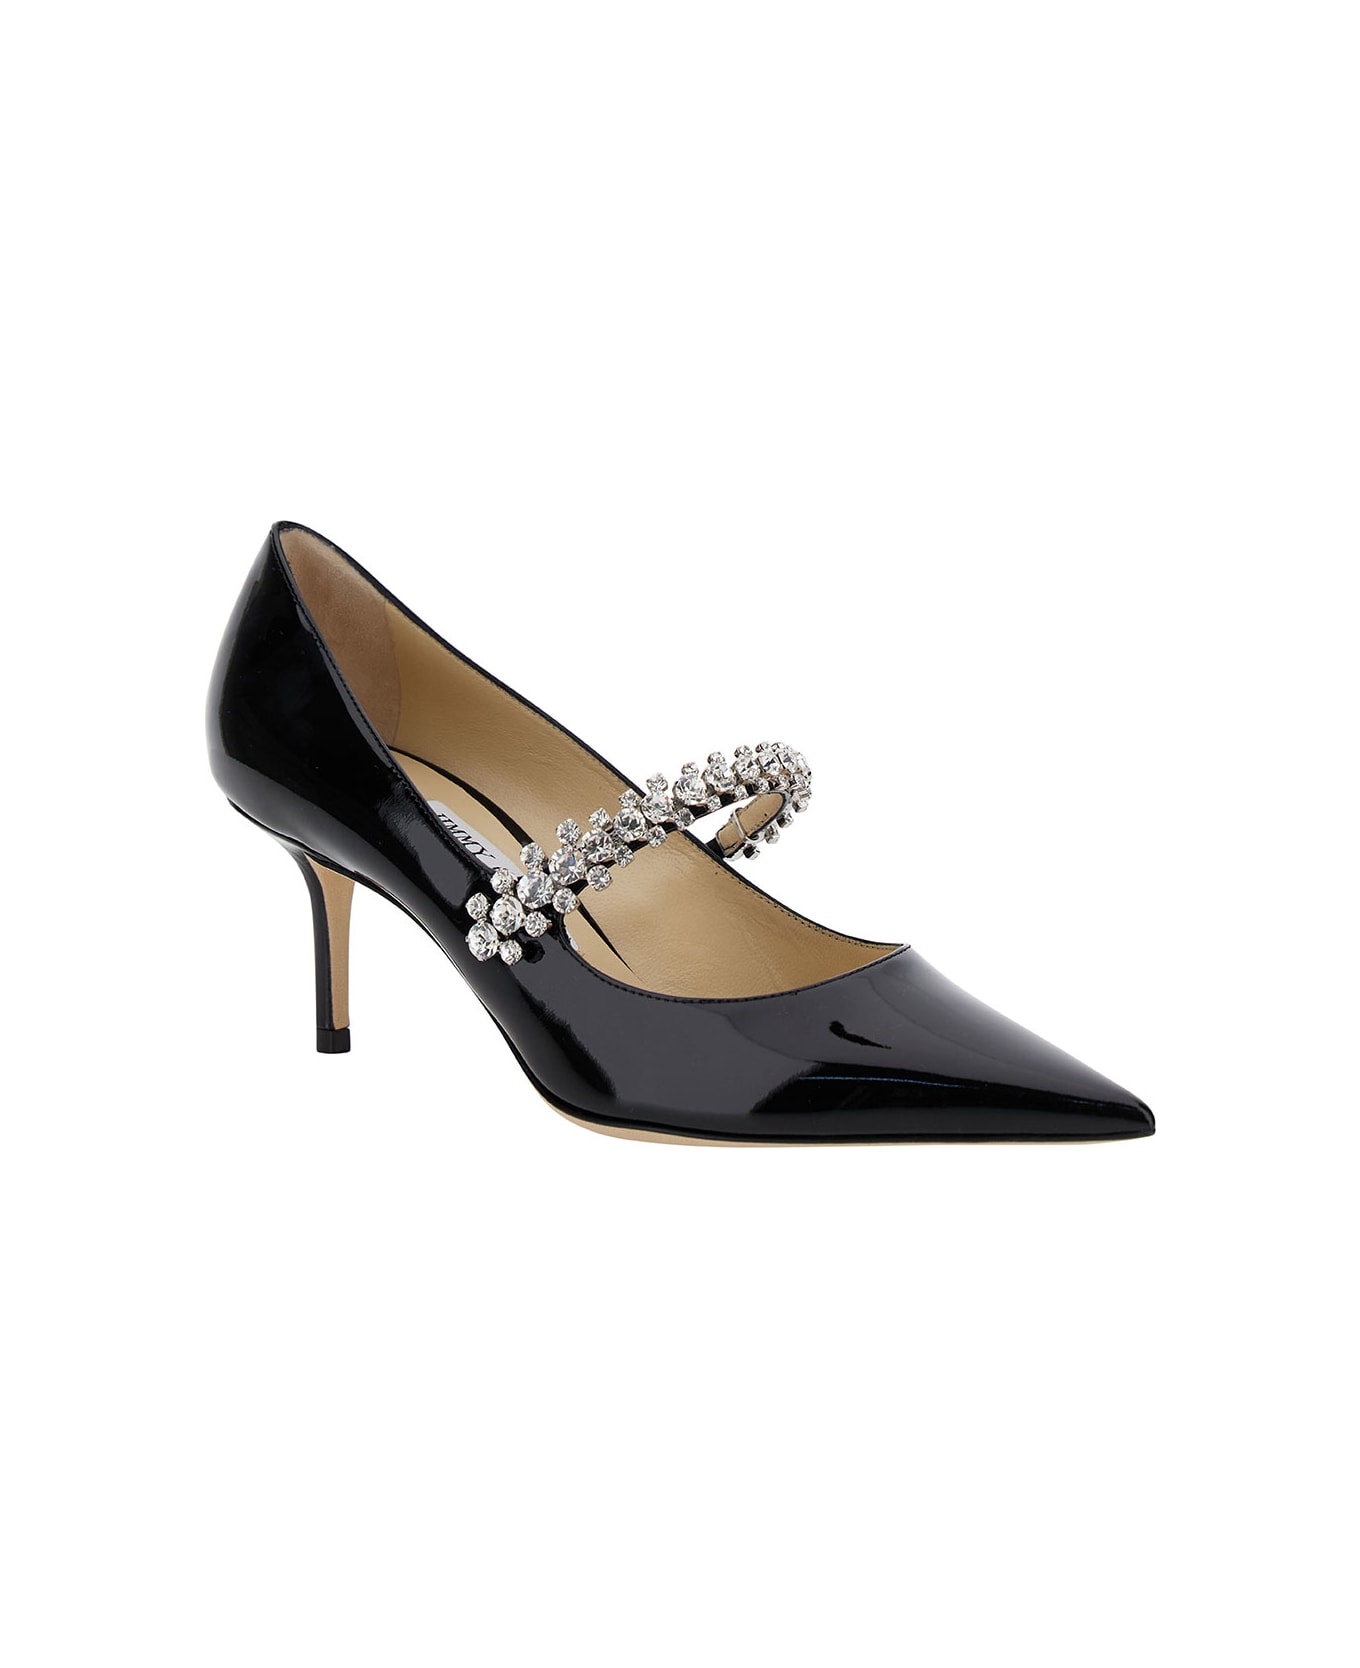 Jimmy Choo 'bing Pump' Black Pumps With Crystal Strap In Patent Leather Woman - Black